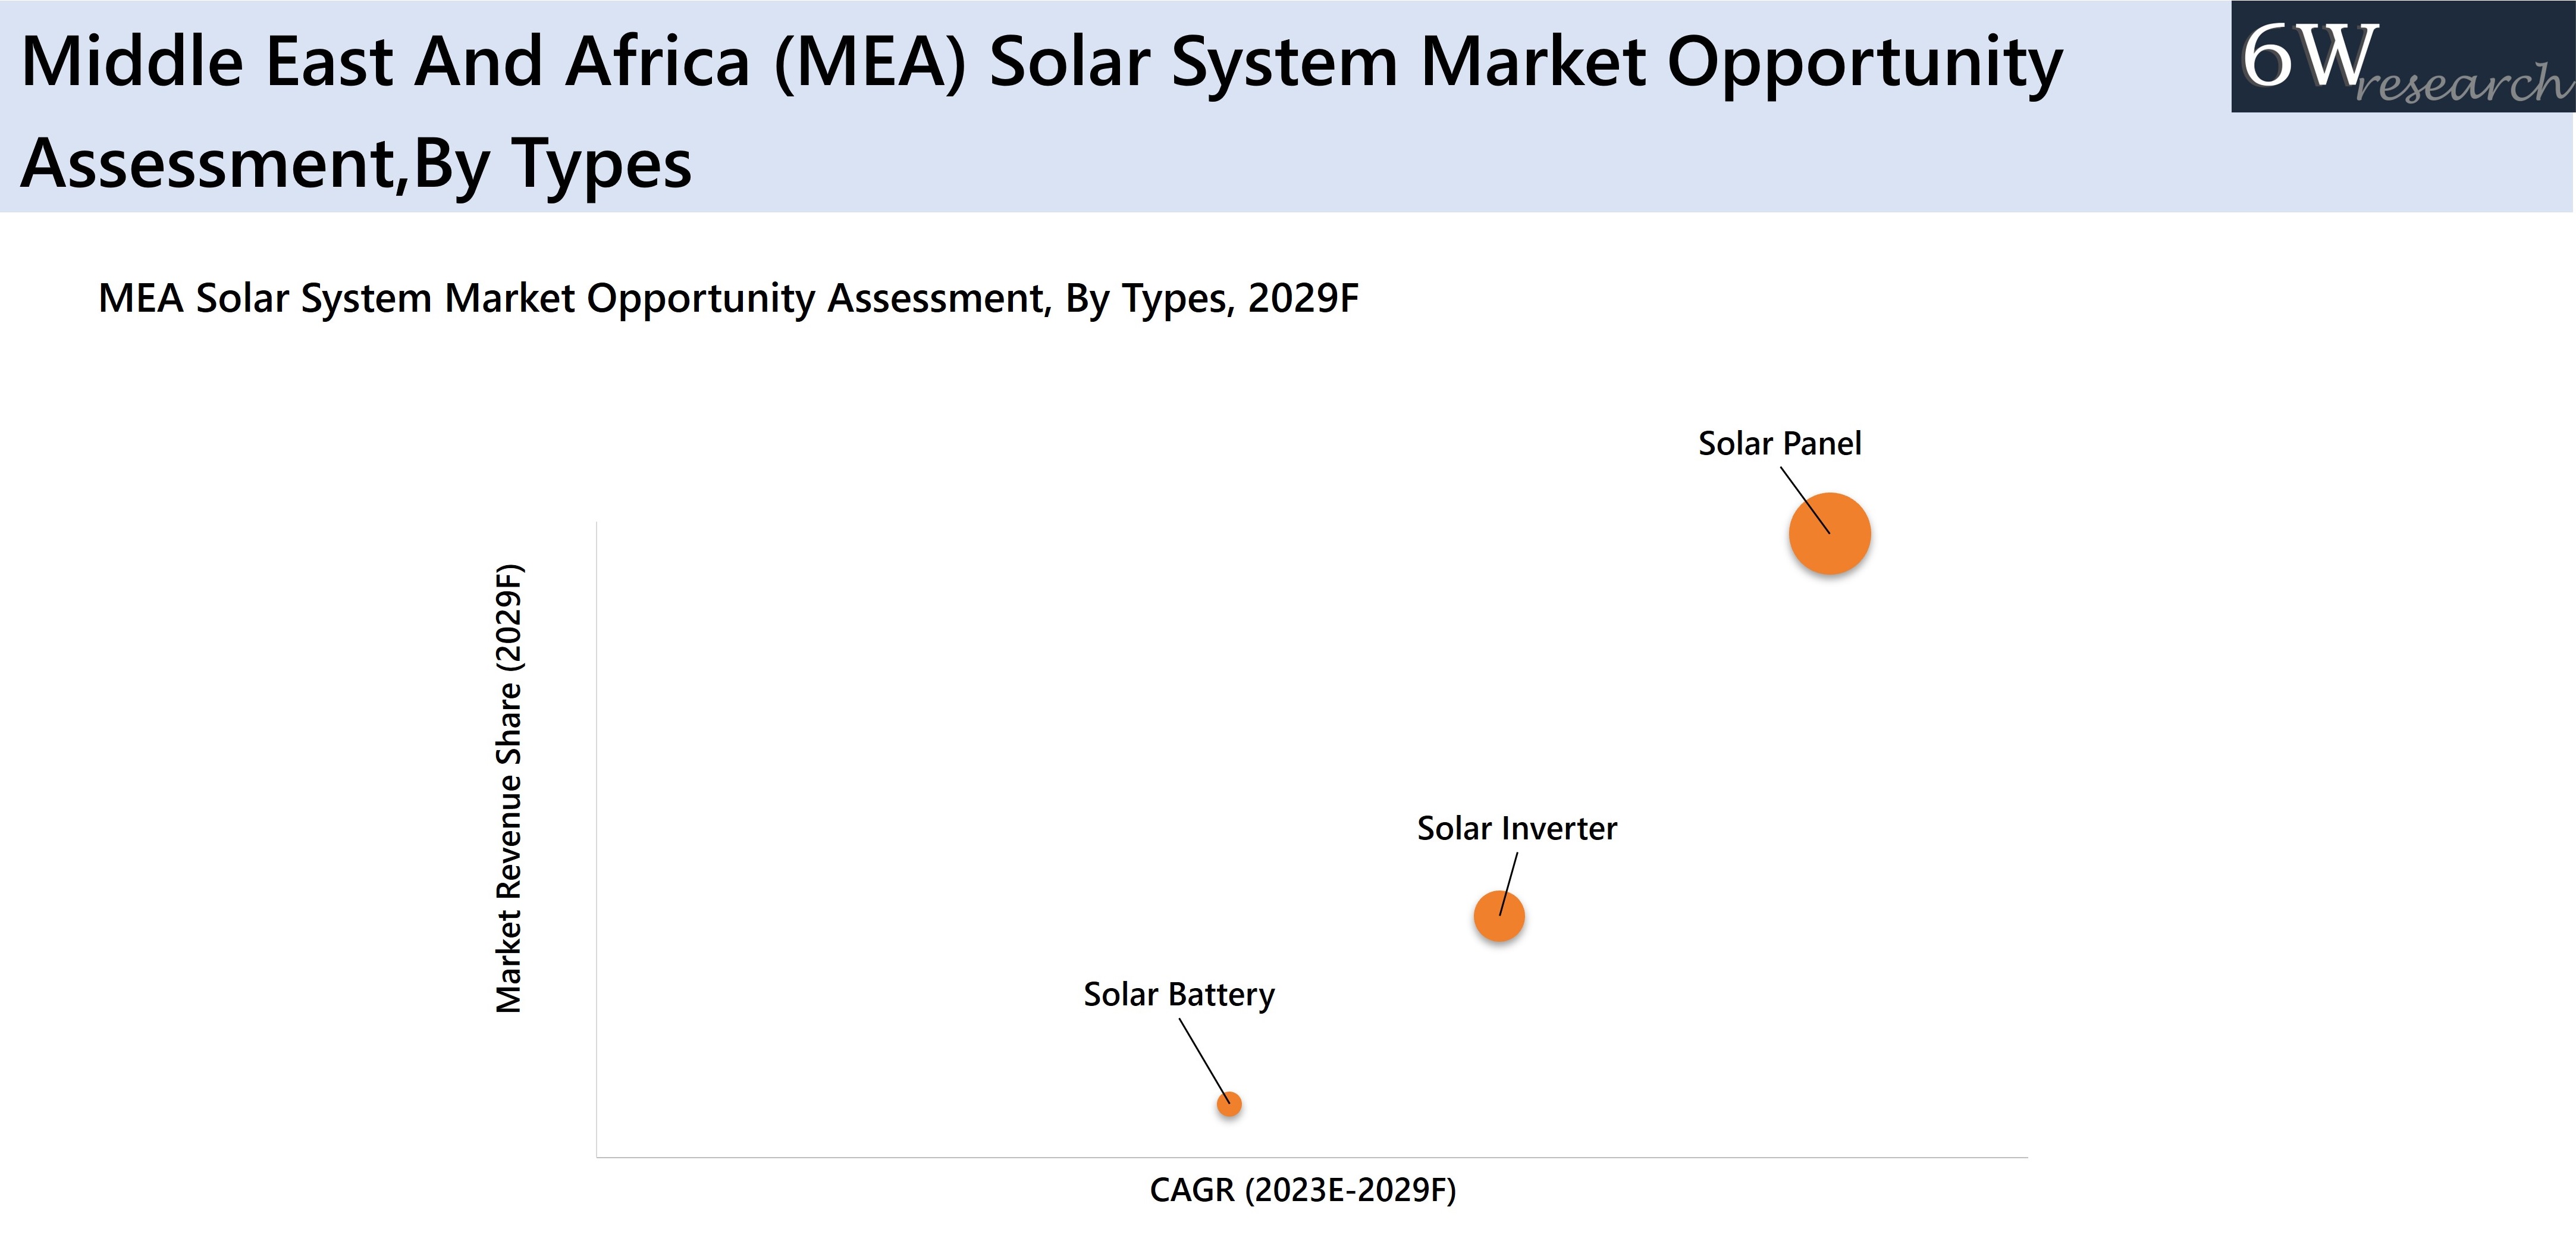 Middle East And Africa (MEA) Solar System Market Opportunity Assessment